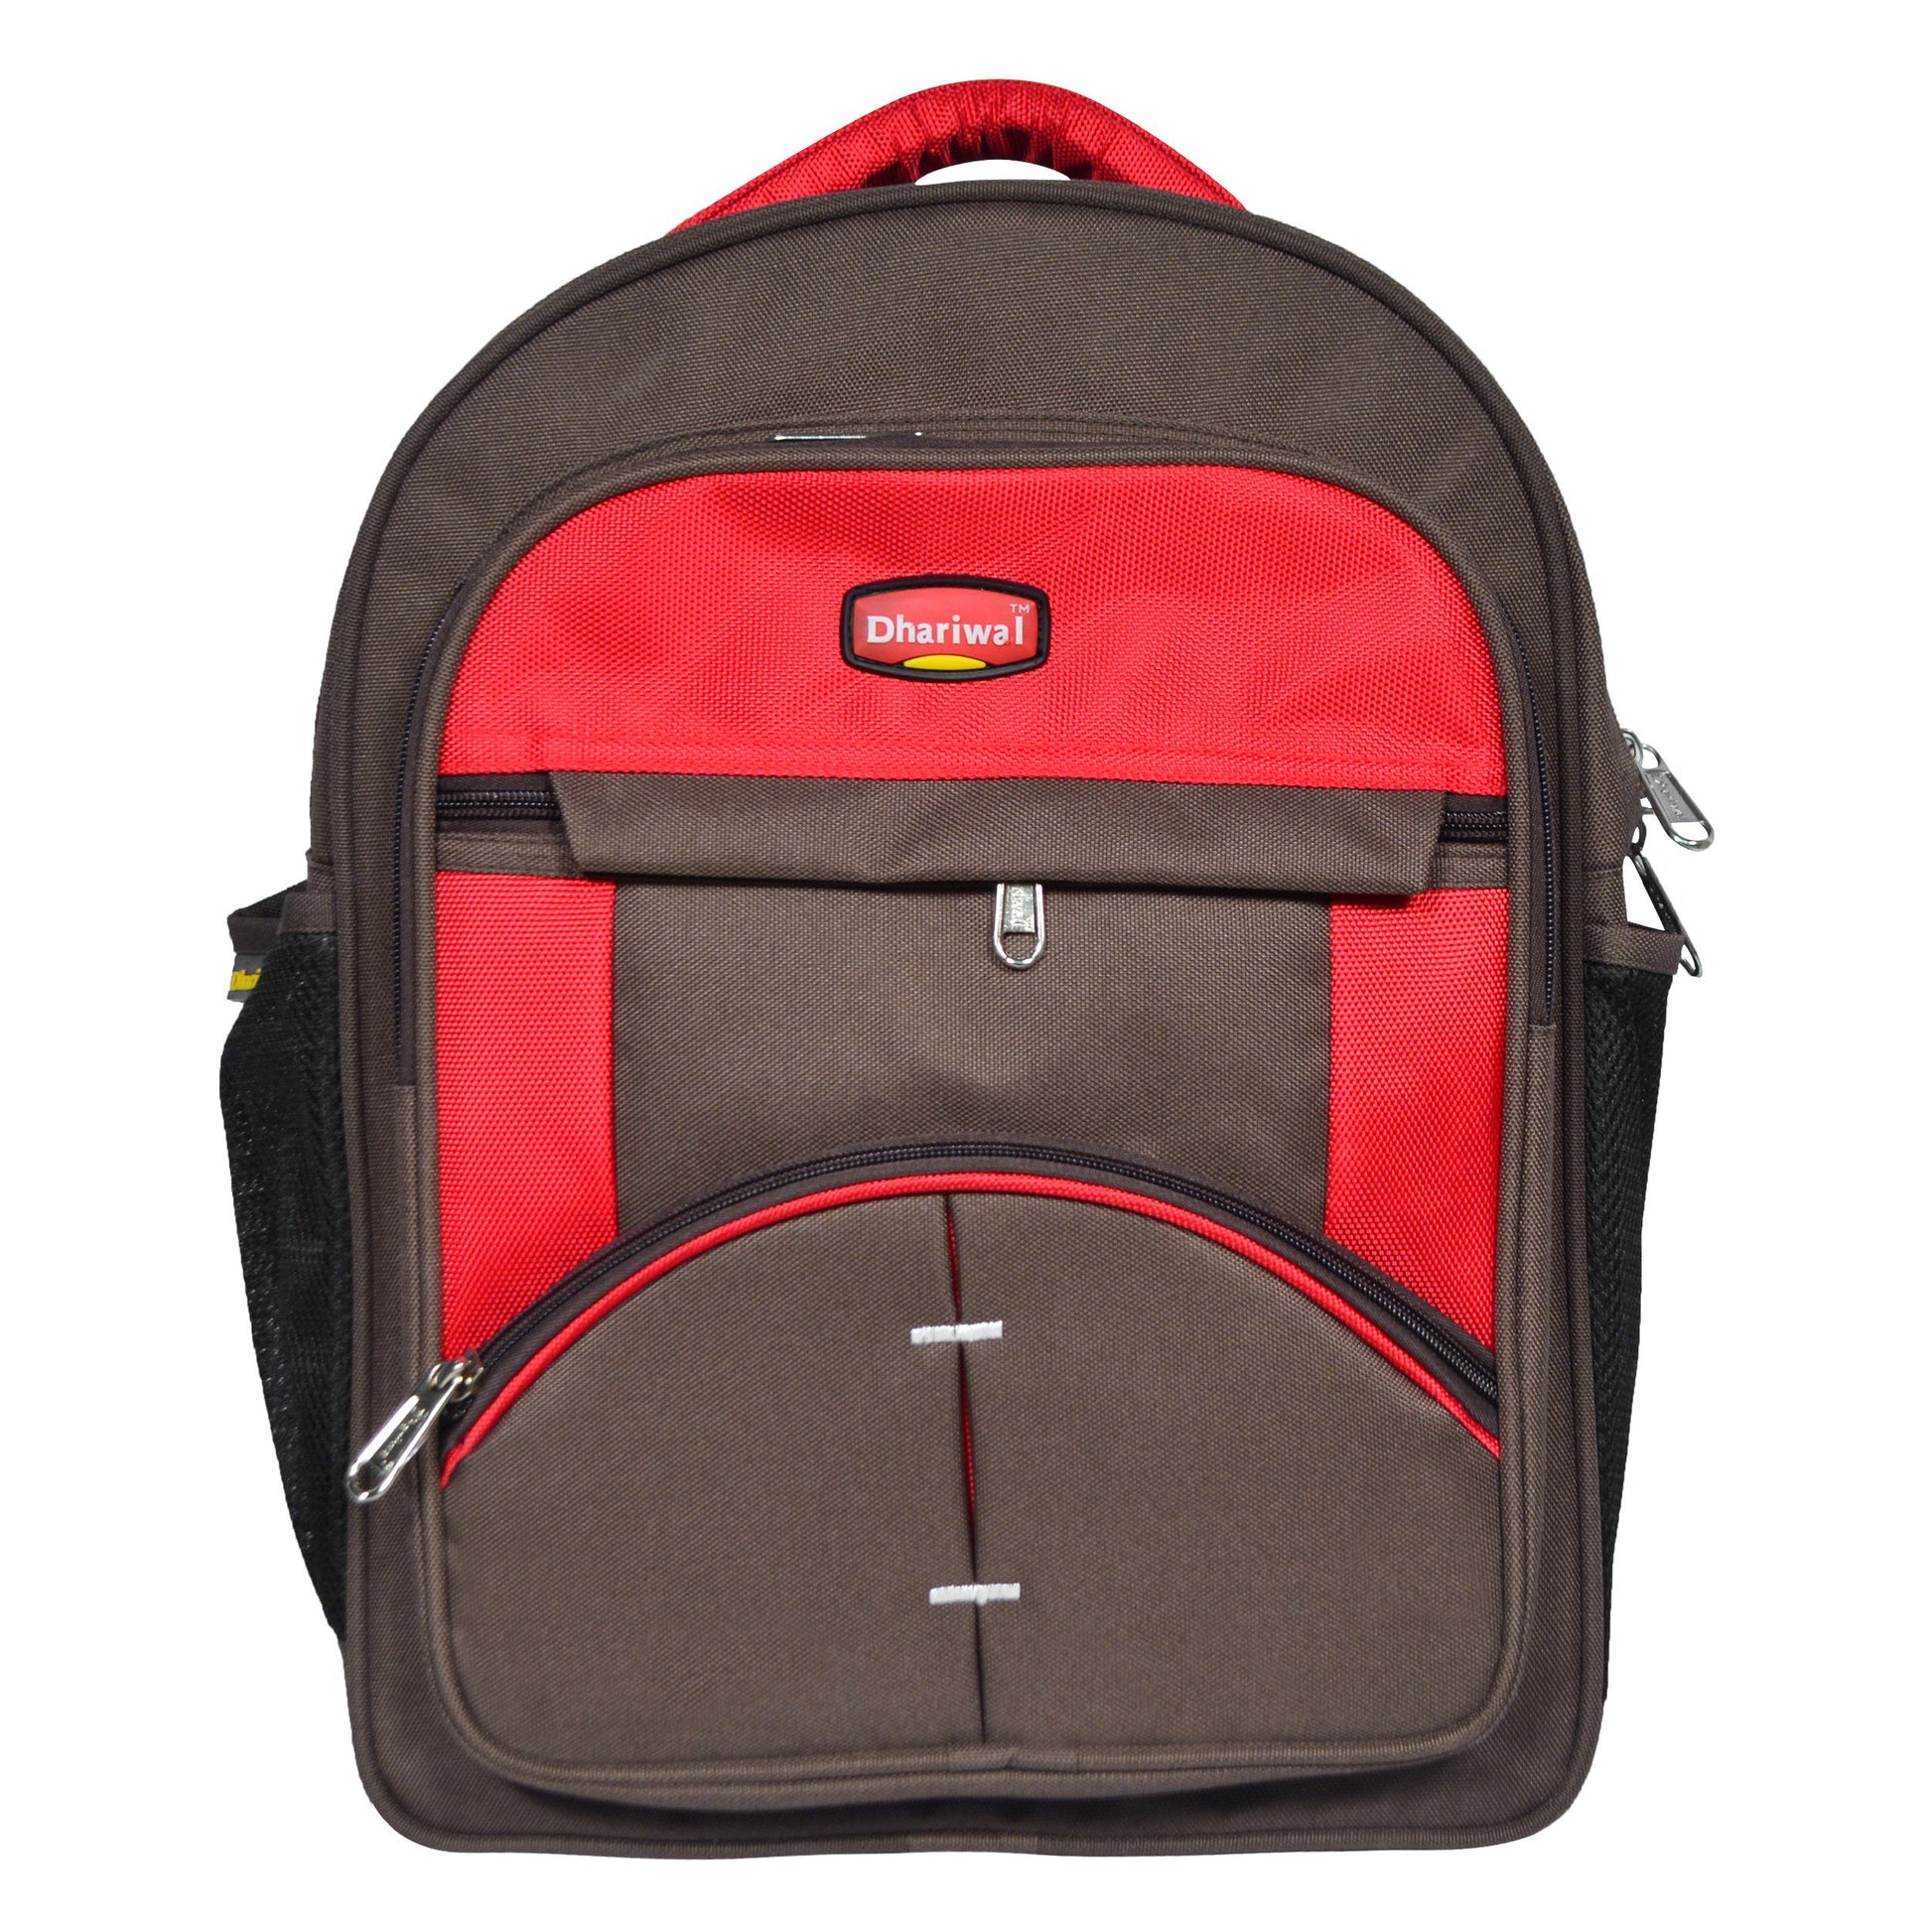 Dhariwal 34L Water Resistant Dual Compartment Matty School Bag School Bag SCB-310 Class 4 to 12 School Bags Dhariwal Brown 